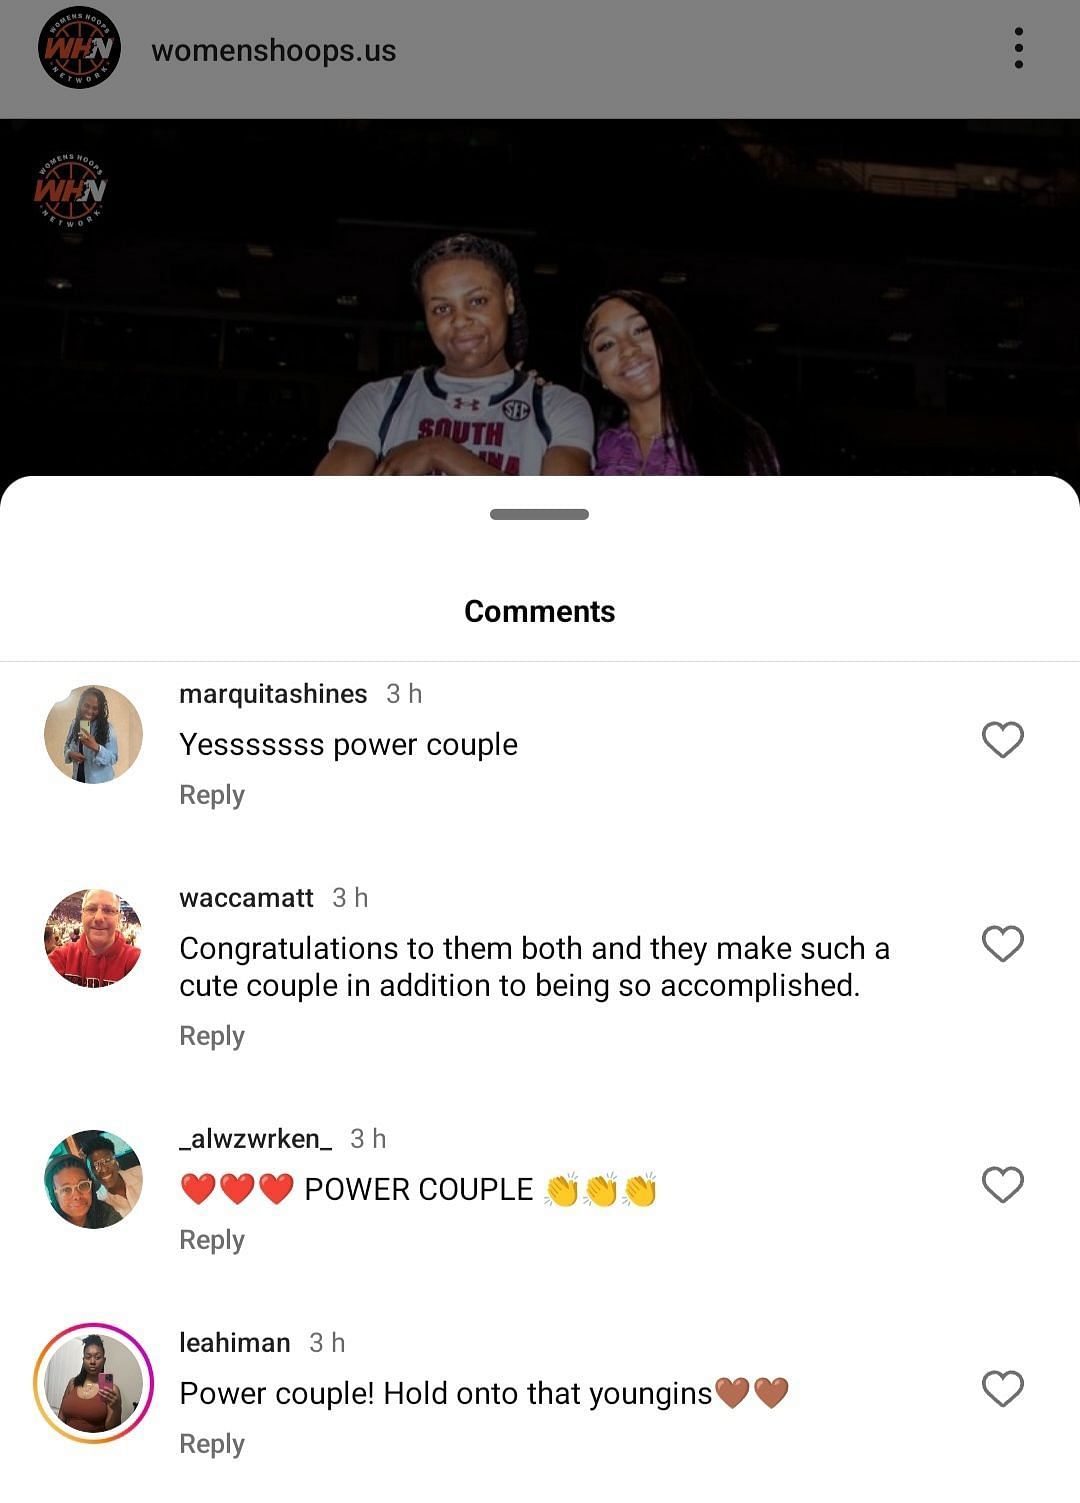 IG comment section